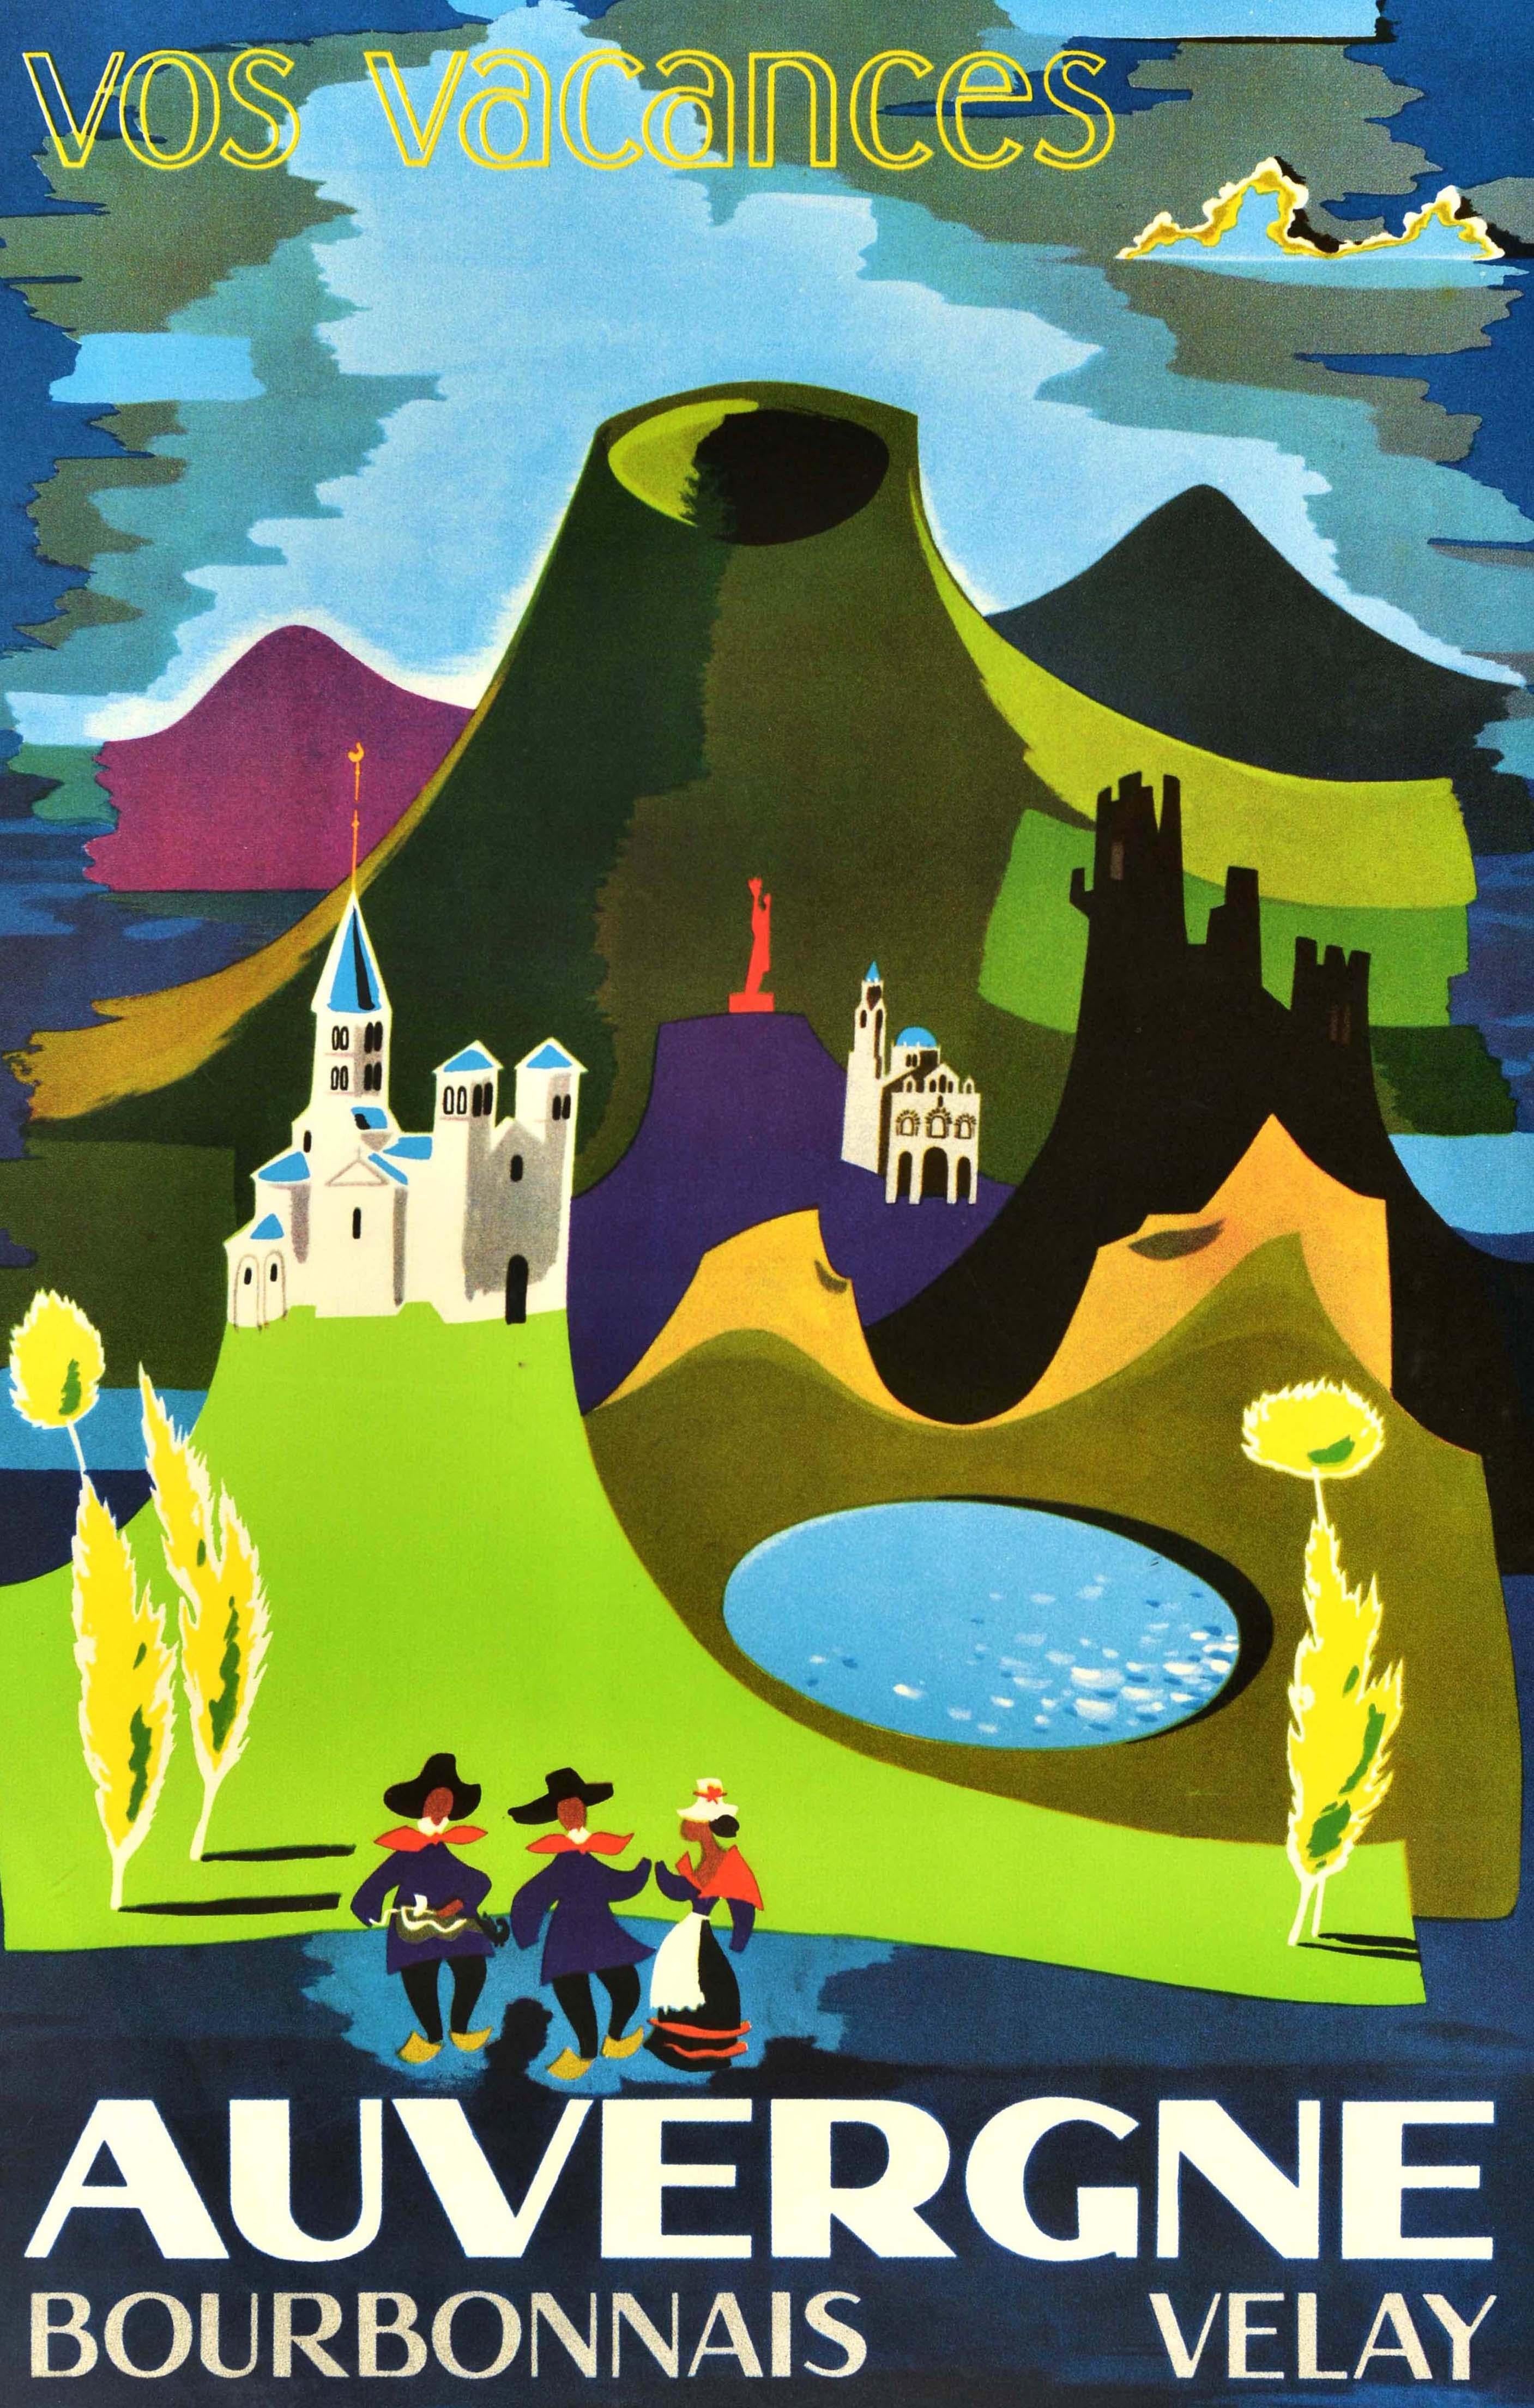 Original vintage travel poster. Your holiday Auvergne Bourbonnais Velay / Vos vacances Auvergne Bourbonnais Velay, featuring colourful illustrations of hills and mountains with historic castles and churches, a lake and trees on a blue background,